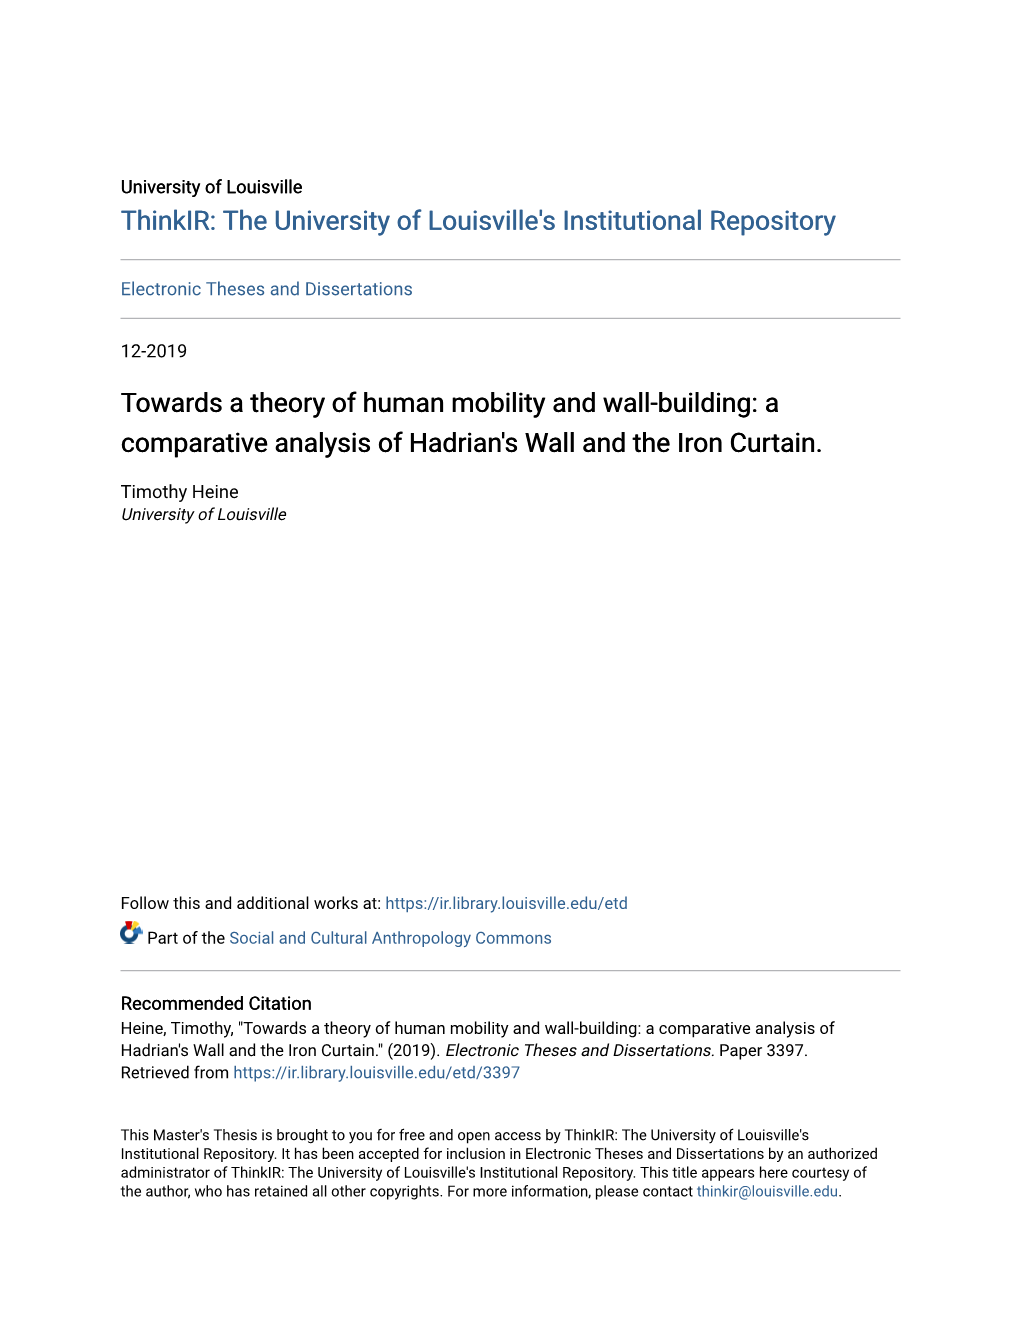 Towards a Theory of Human Mobility and Wall-Building: a Comparative Analysis of Hadrian's Wall and the Iron Curtain